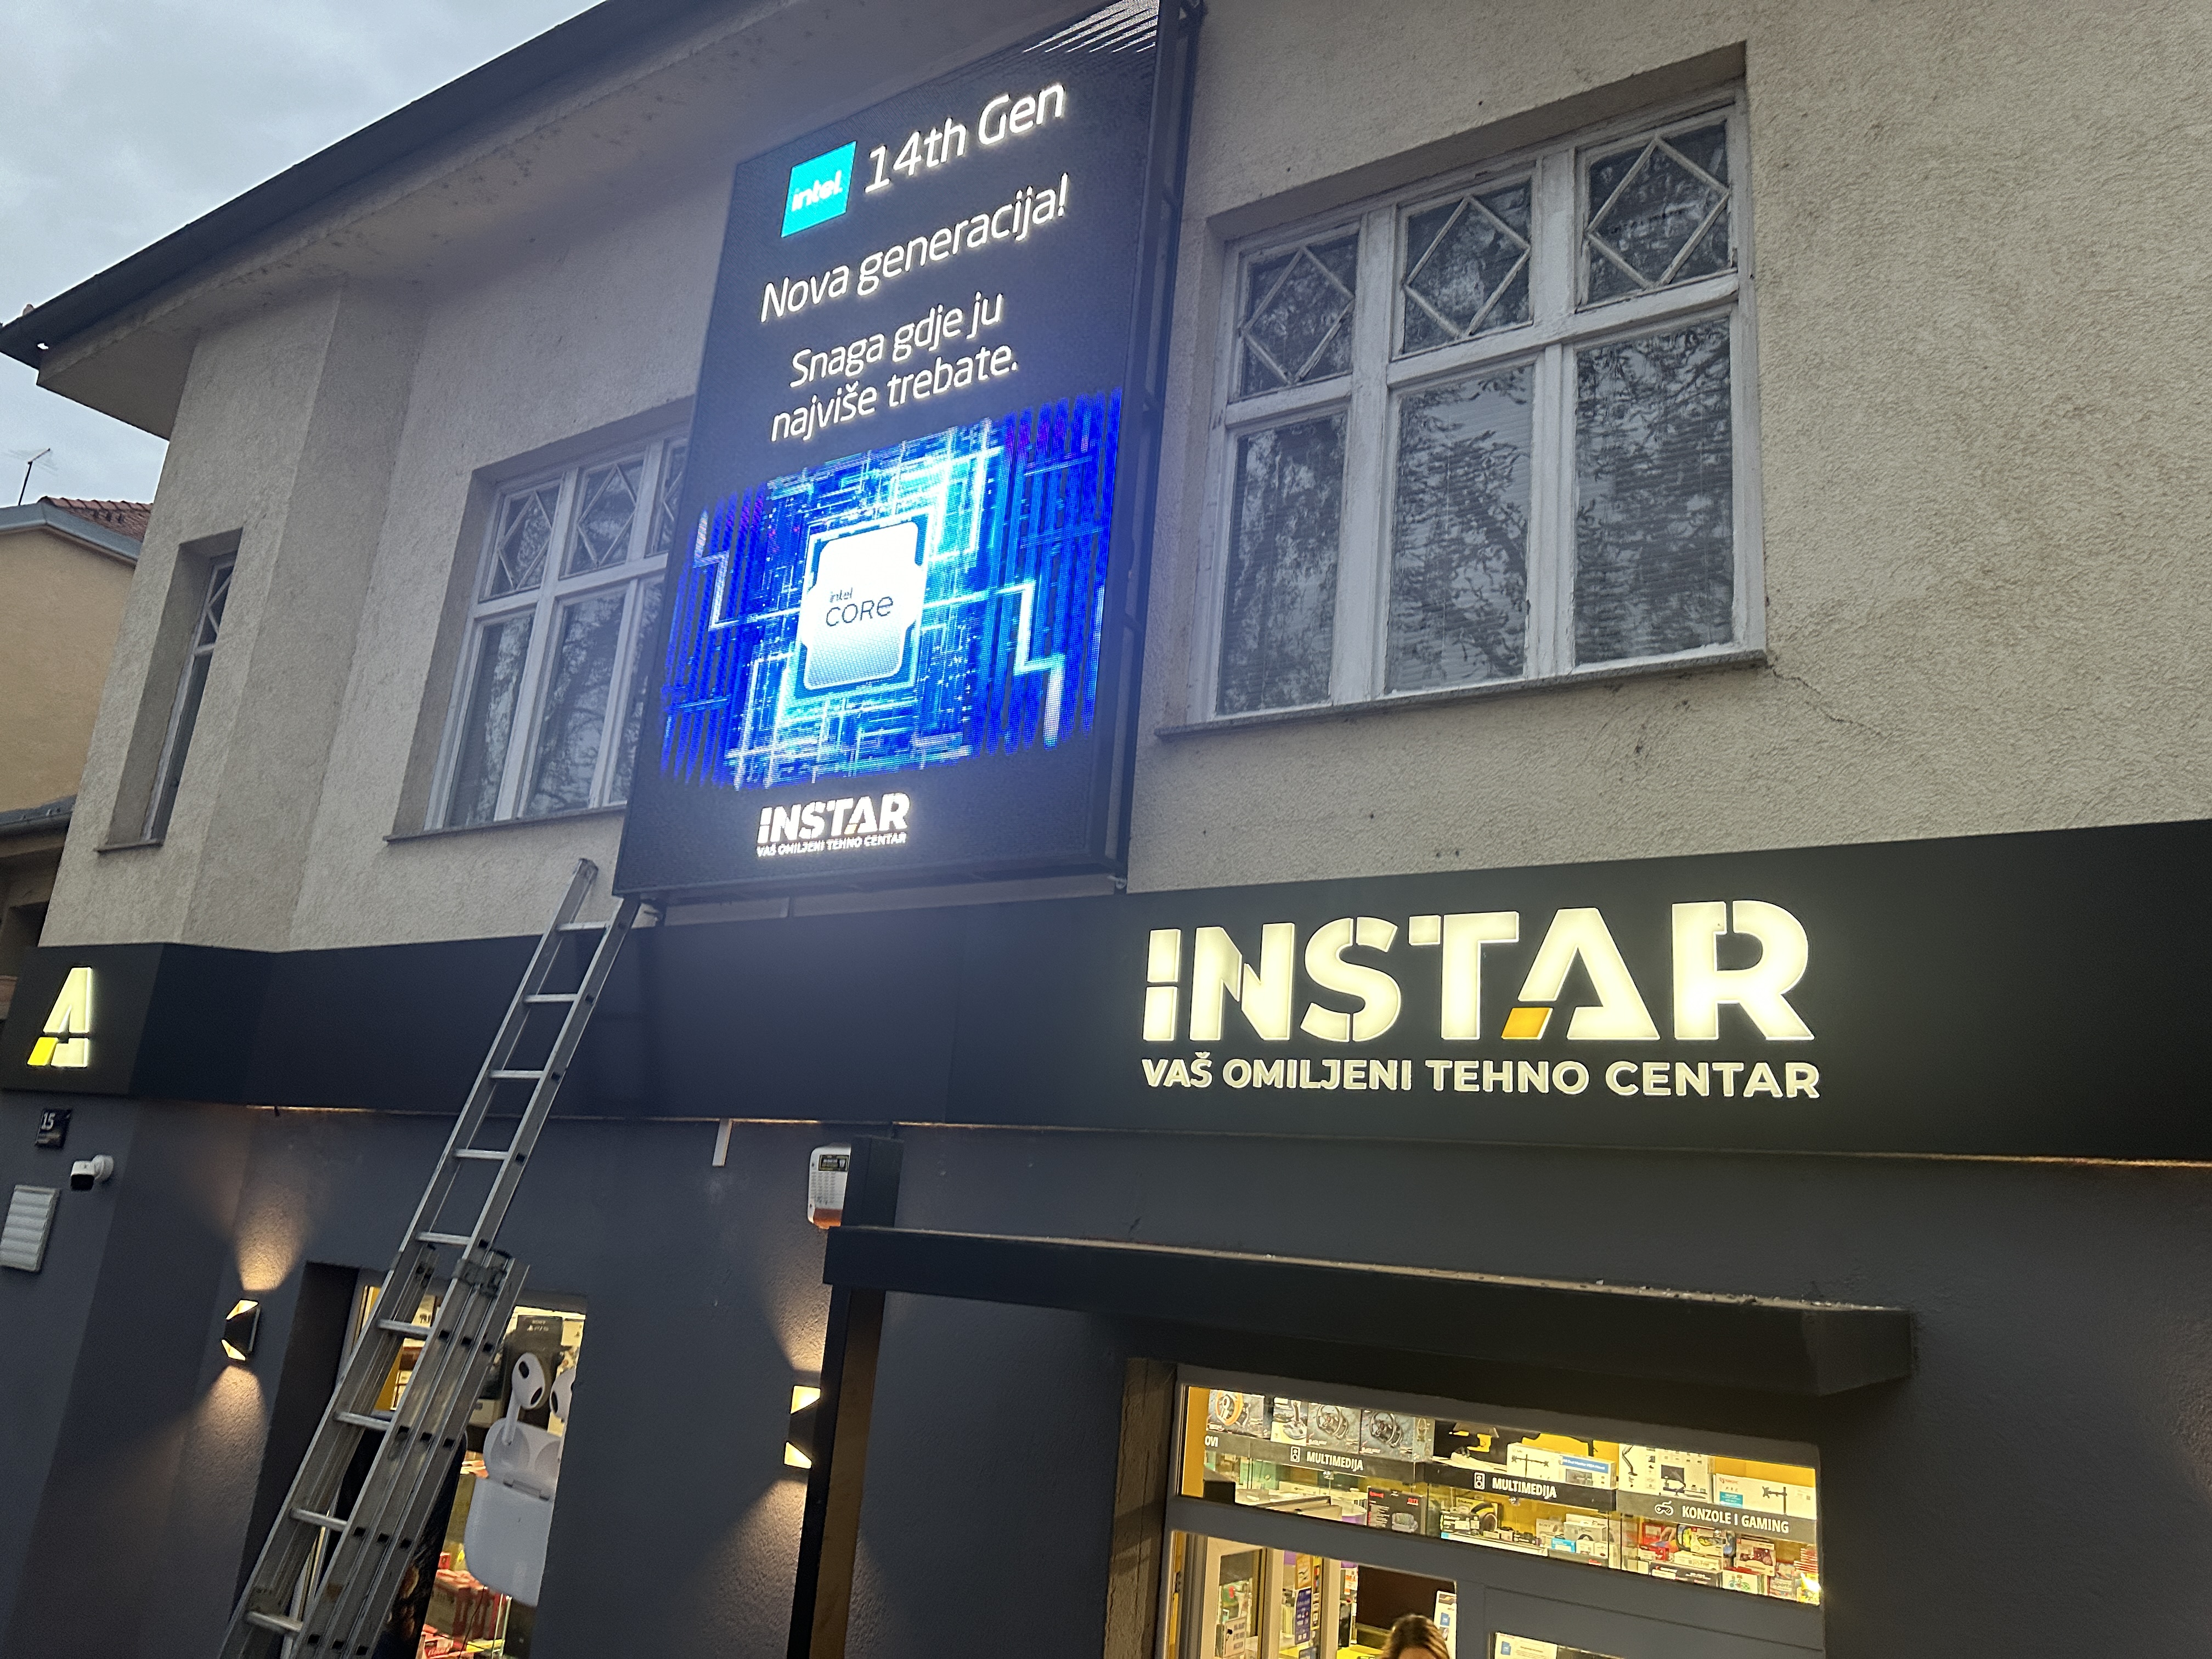 FIXED INSTALLATION - OUTDOOR LED DISPAY P6.6